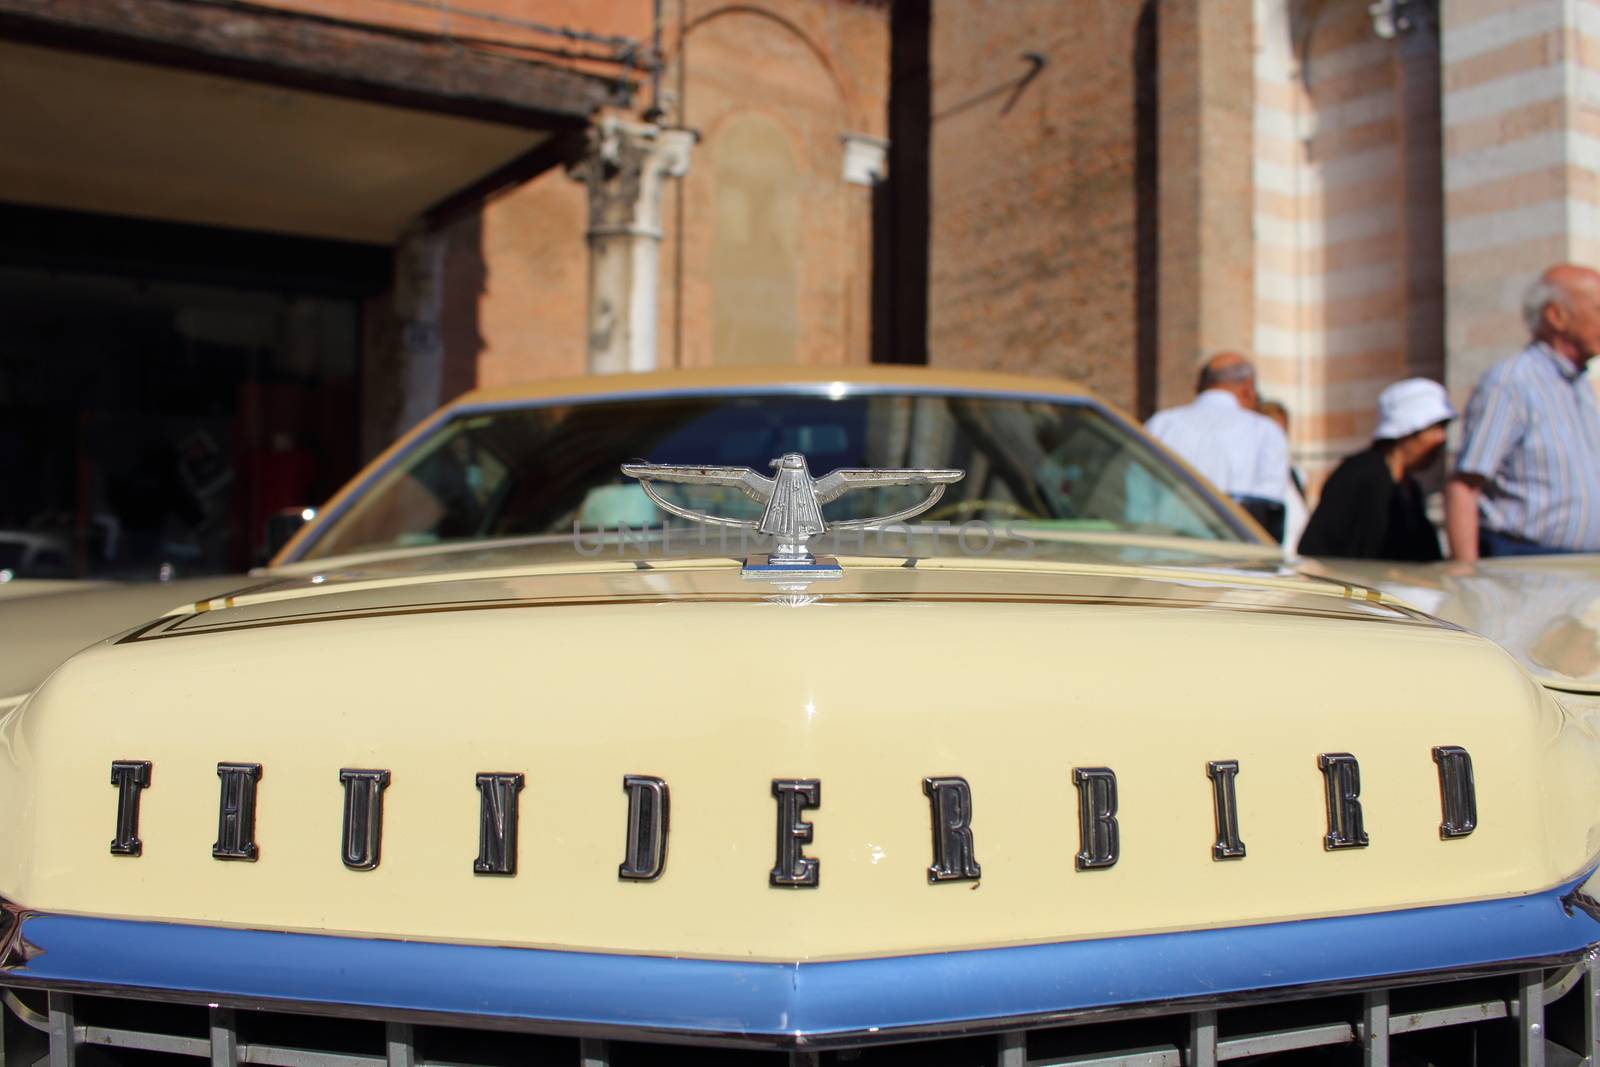 Ferrara, Italia - September 24, 2016: The event "AutoMotoStoriche in Old Town" you can admire an exhibition of cars and motorcycles in the historic center of Ferrara. Front of Ford Thunderbird, years 1976